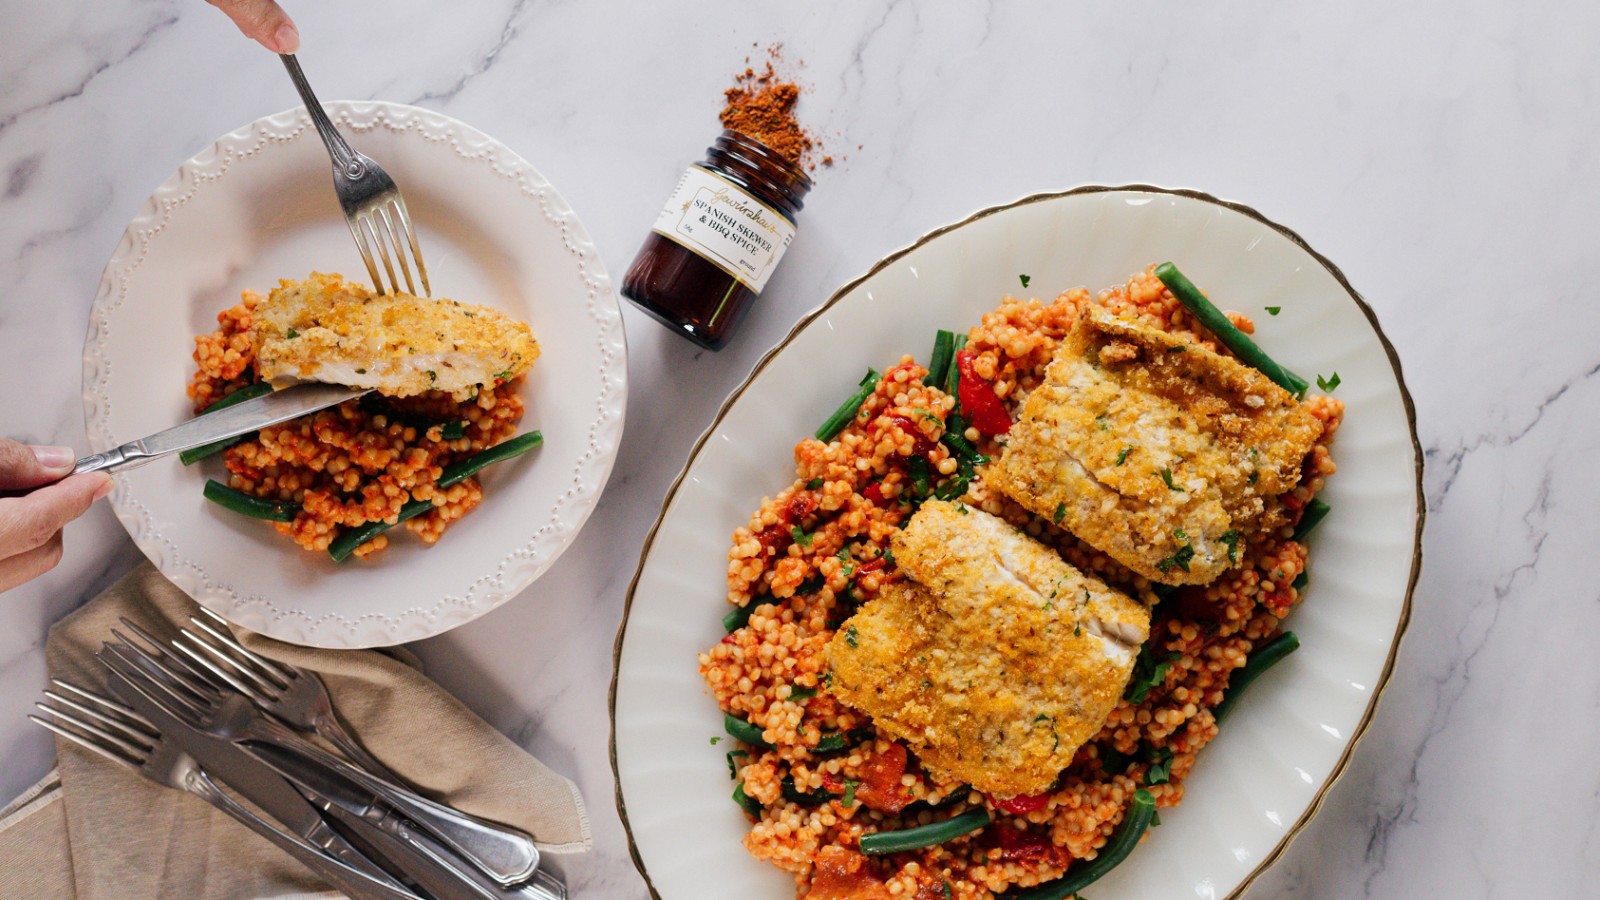 Image of Spanish Crumbed Fish with Red Pepper Cous Cous